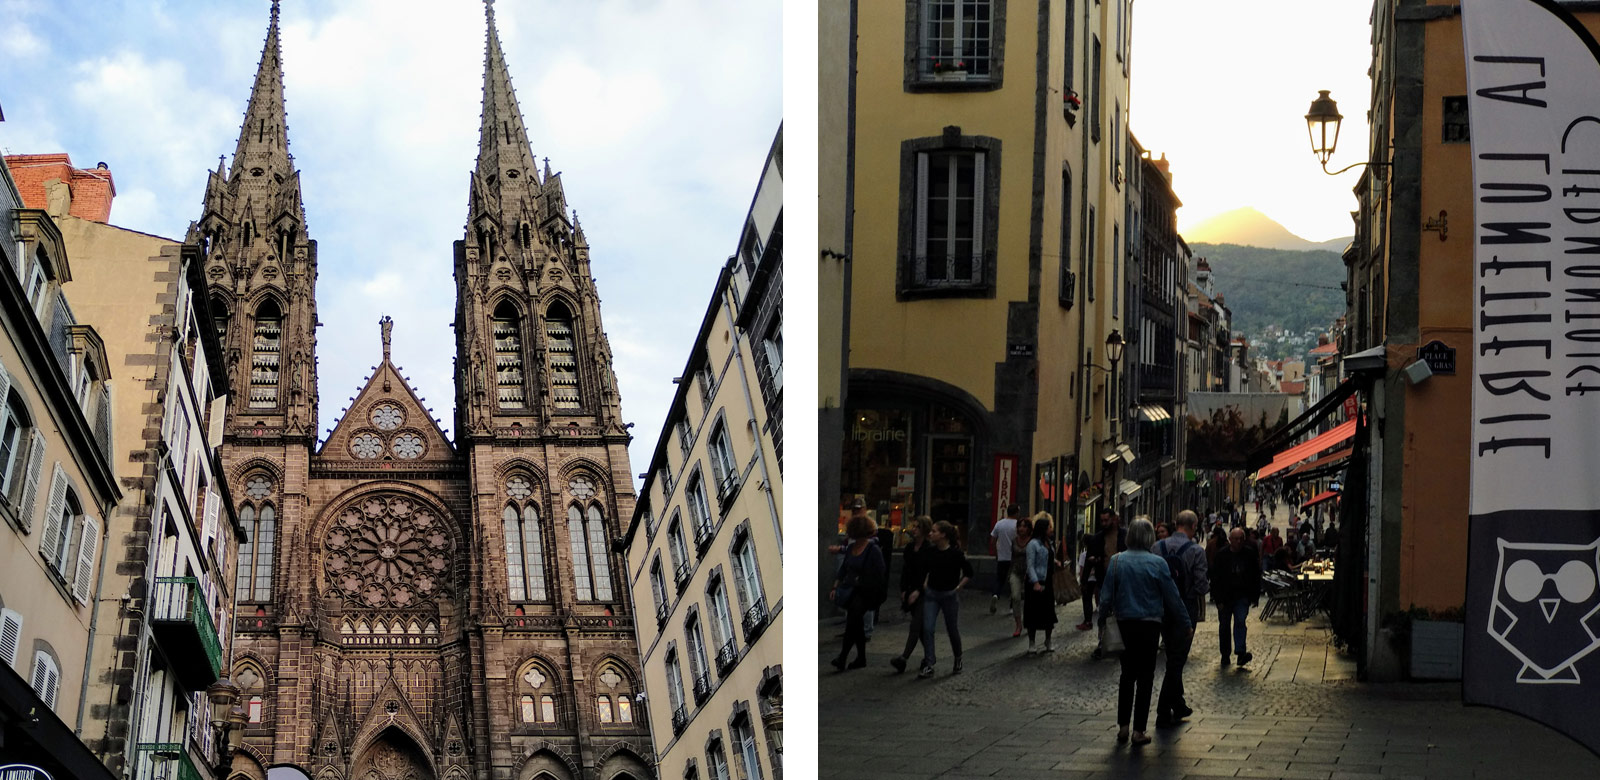 Holiday tips to discover in the Puy-de-Dôme (Auvergne-Rhônes-Alpes) cities such as Clermont-Ferrand.